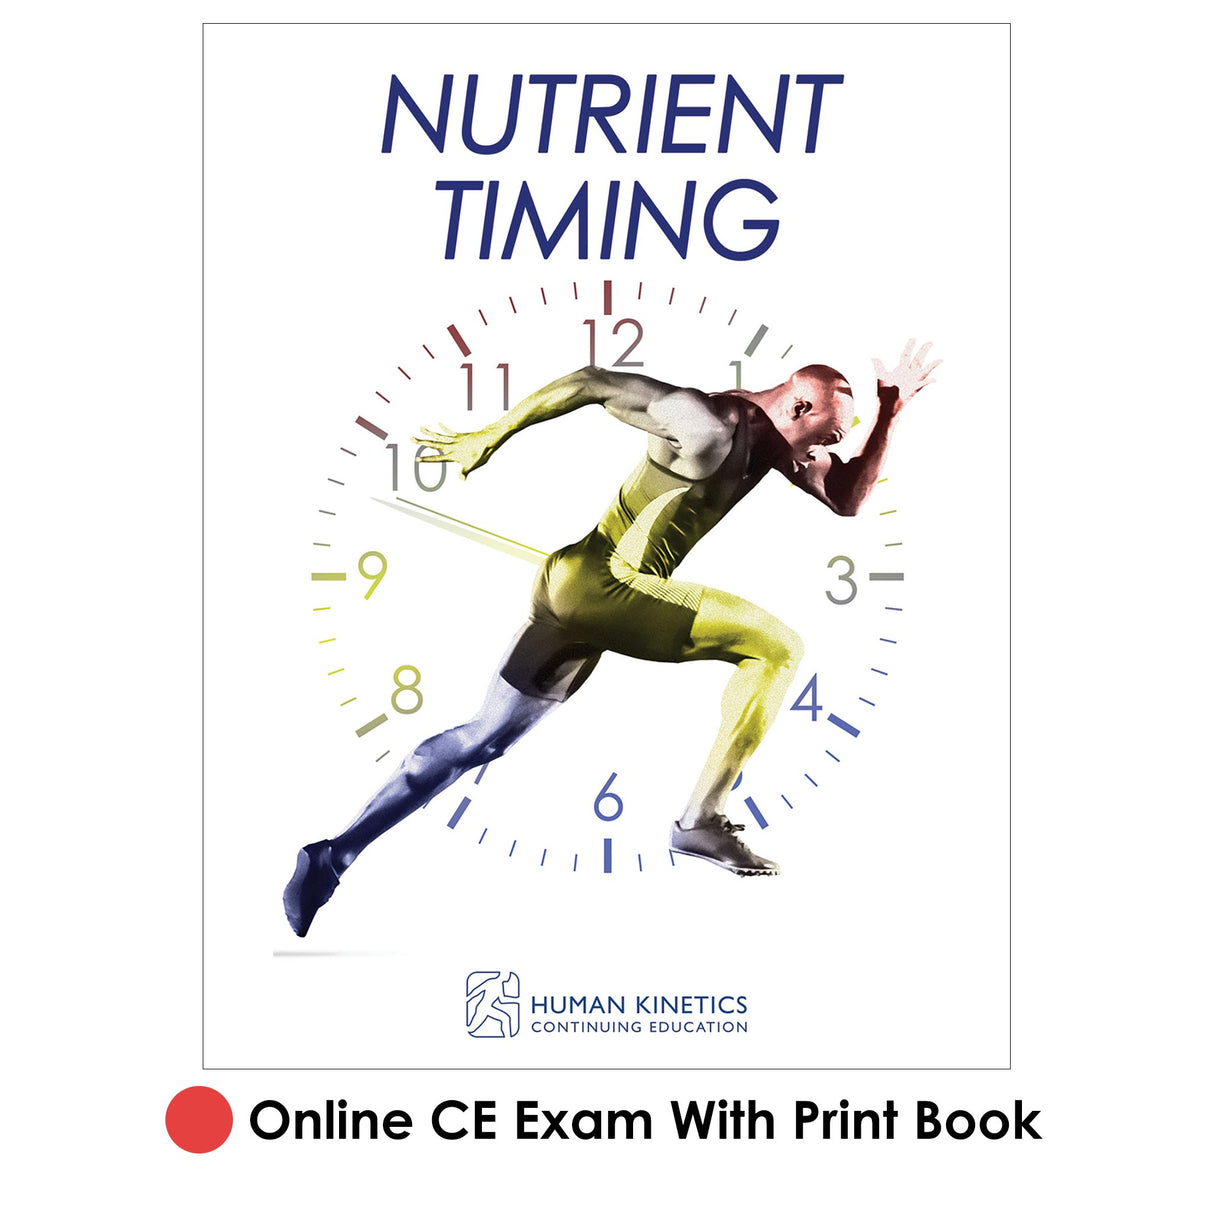 Nutrient Timing Online CE Exam With Print Book